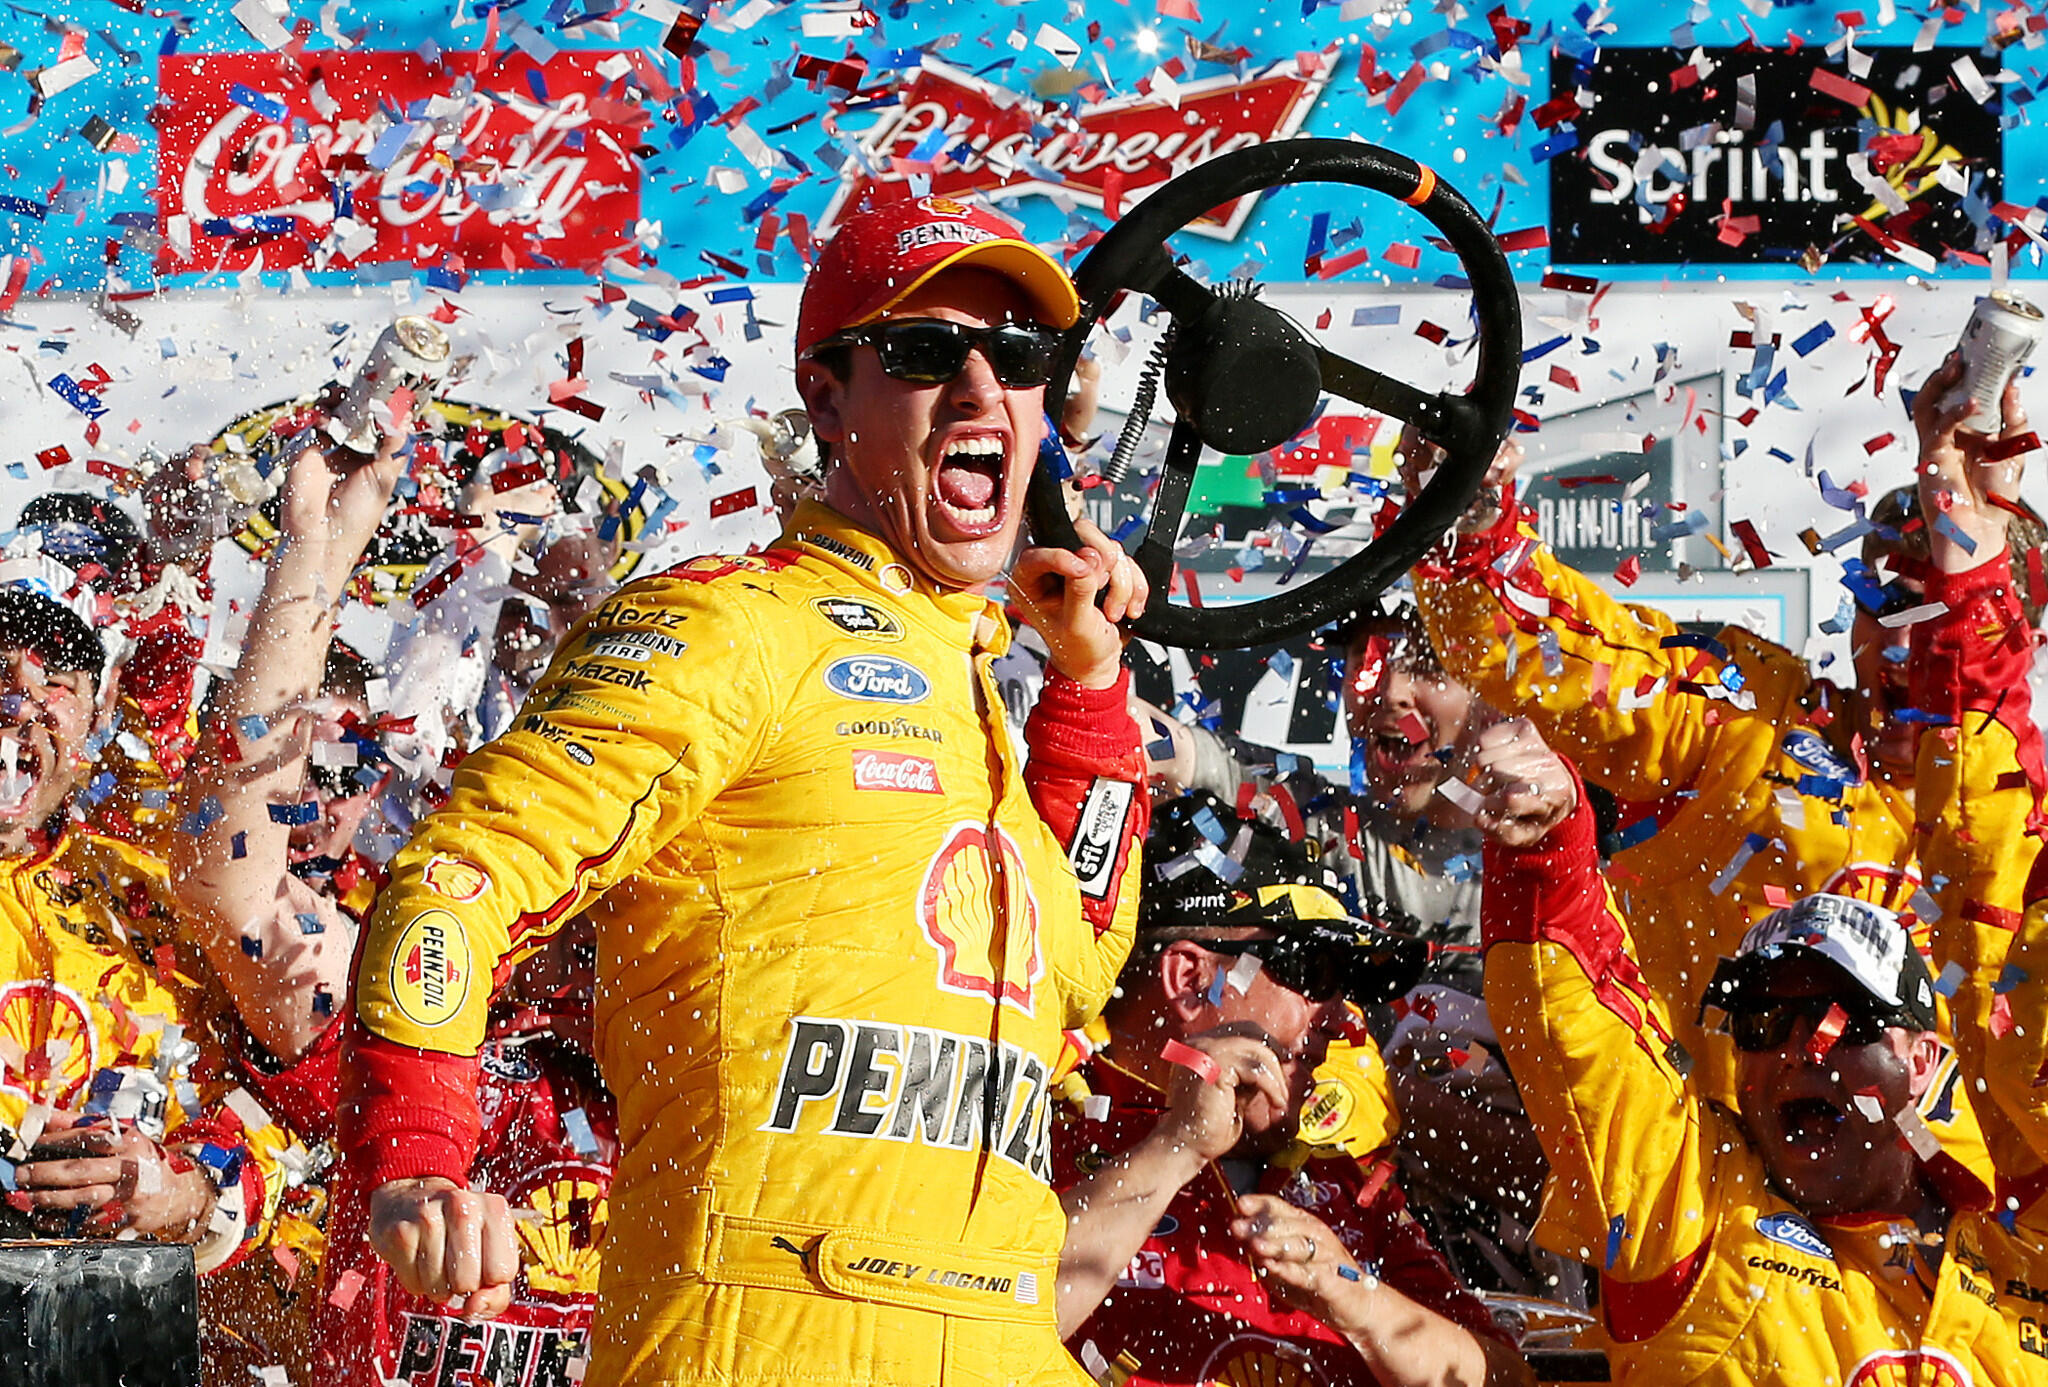 Joey Logano, driver of the #22 Shell Pennzoil Ford, celebrates in victory lane after winning the NASCAR Sprint Cup Series 57th Annual Daytona 500 at Daytona International Speedway on February 22, 2015 in Daytona Beach, Florida.